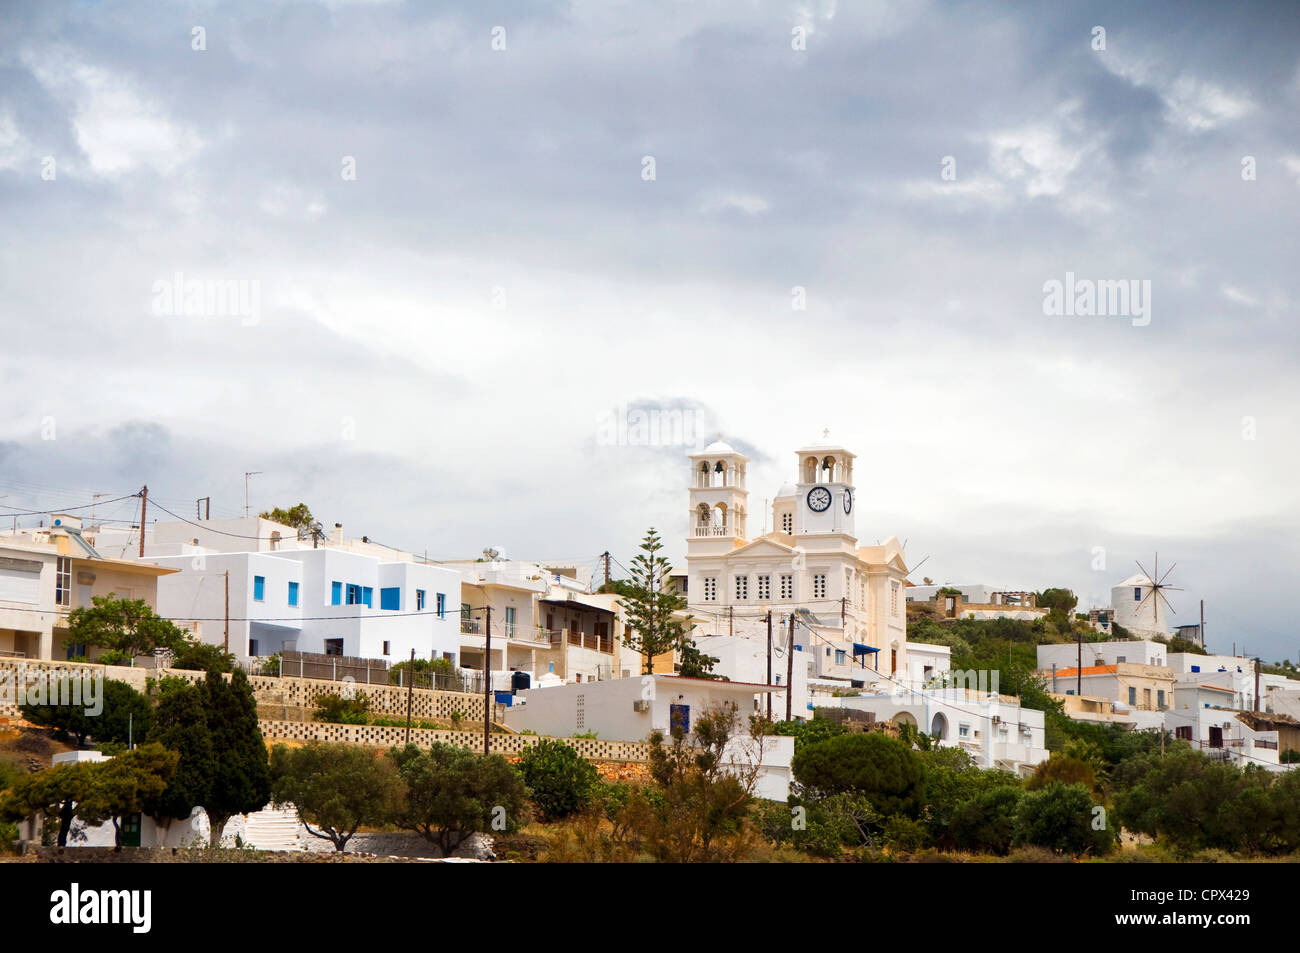 Milos Cyclades Greece Greek island Greek island travel typical architecture white buildings blue shutters church dome blue cathe Stock Photo